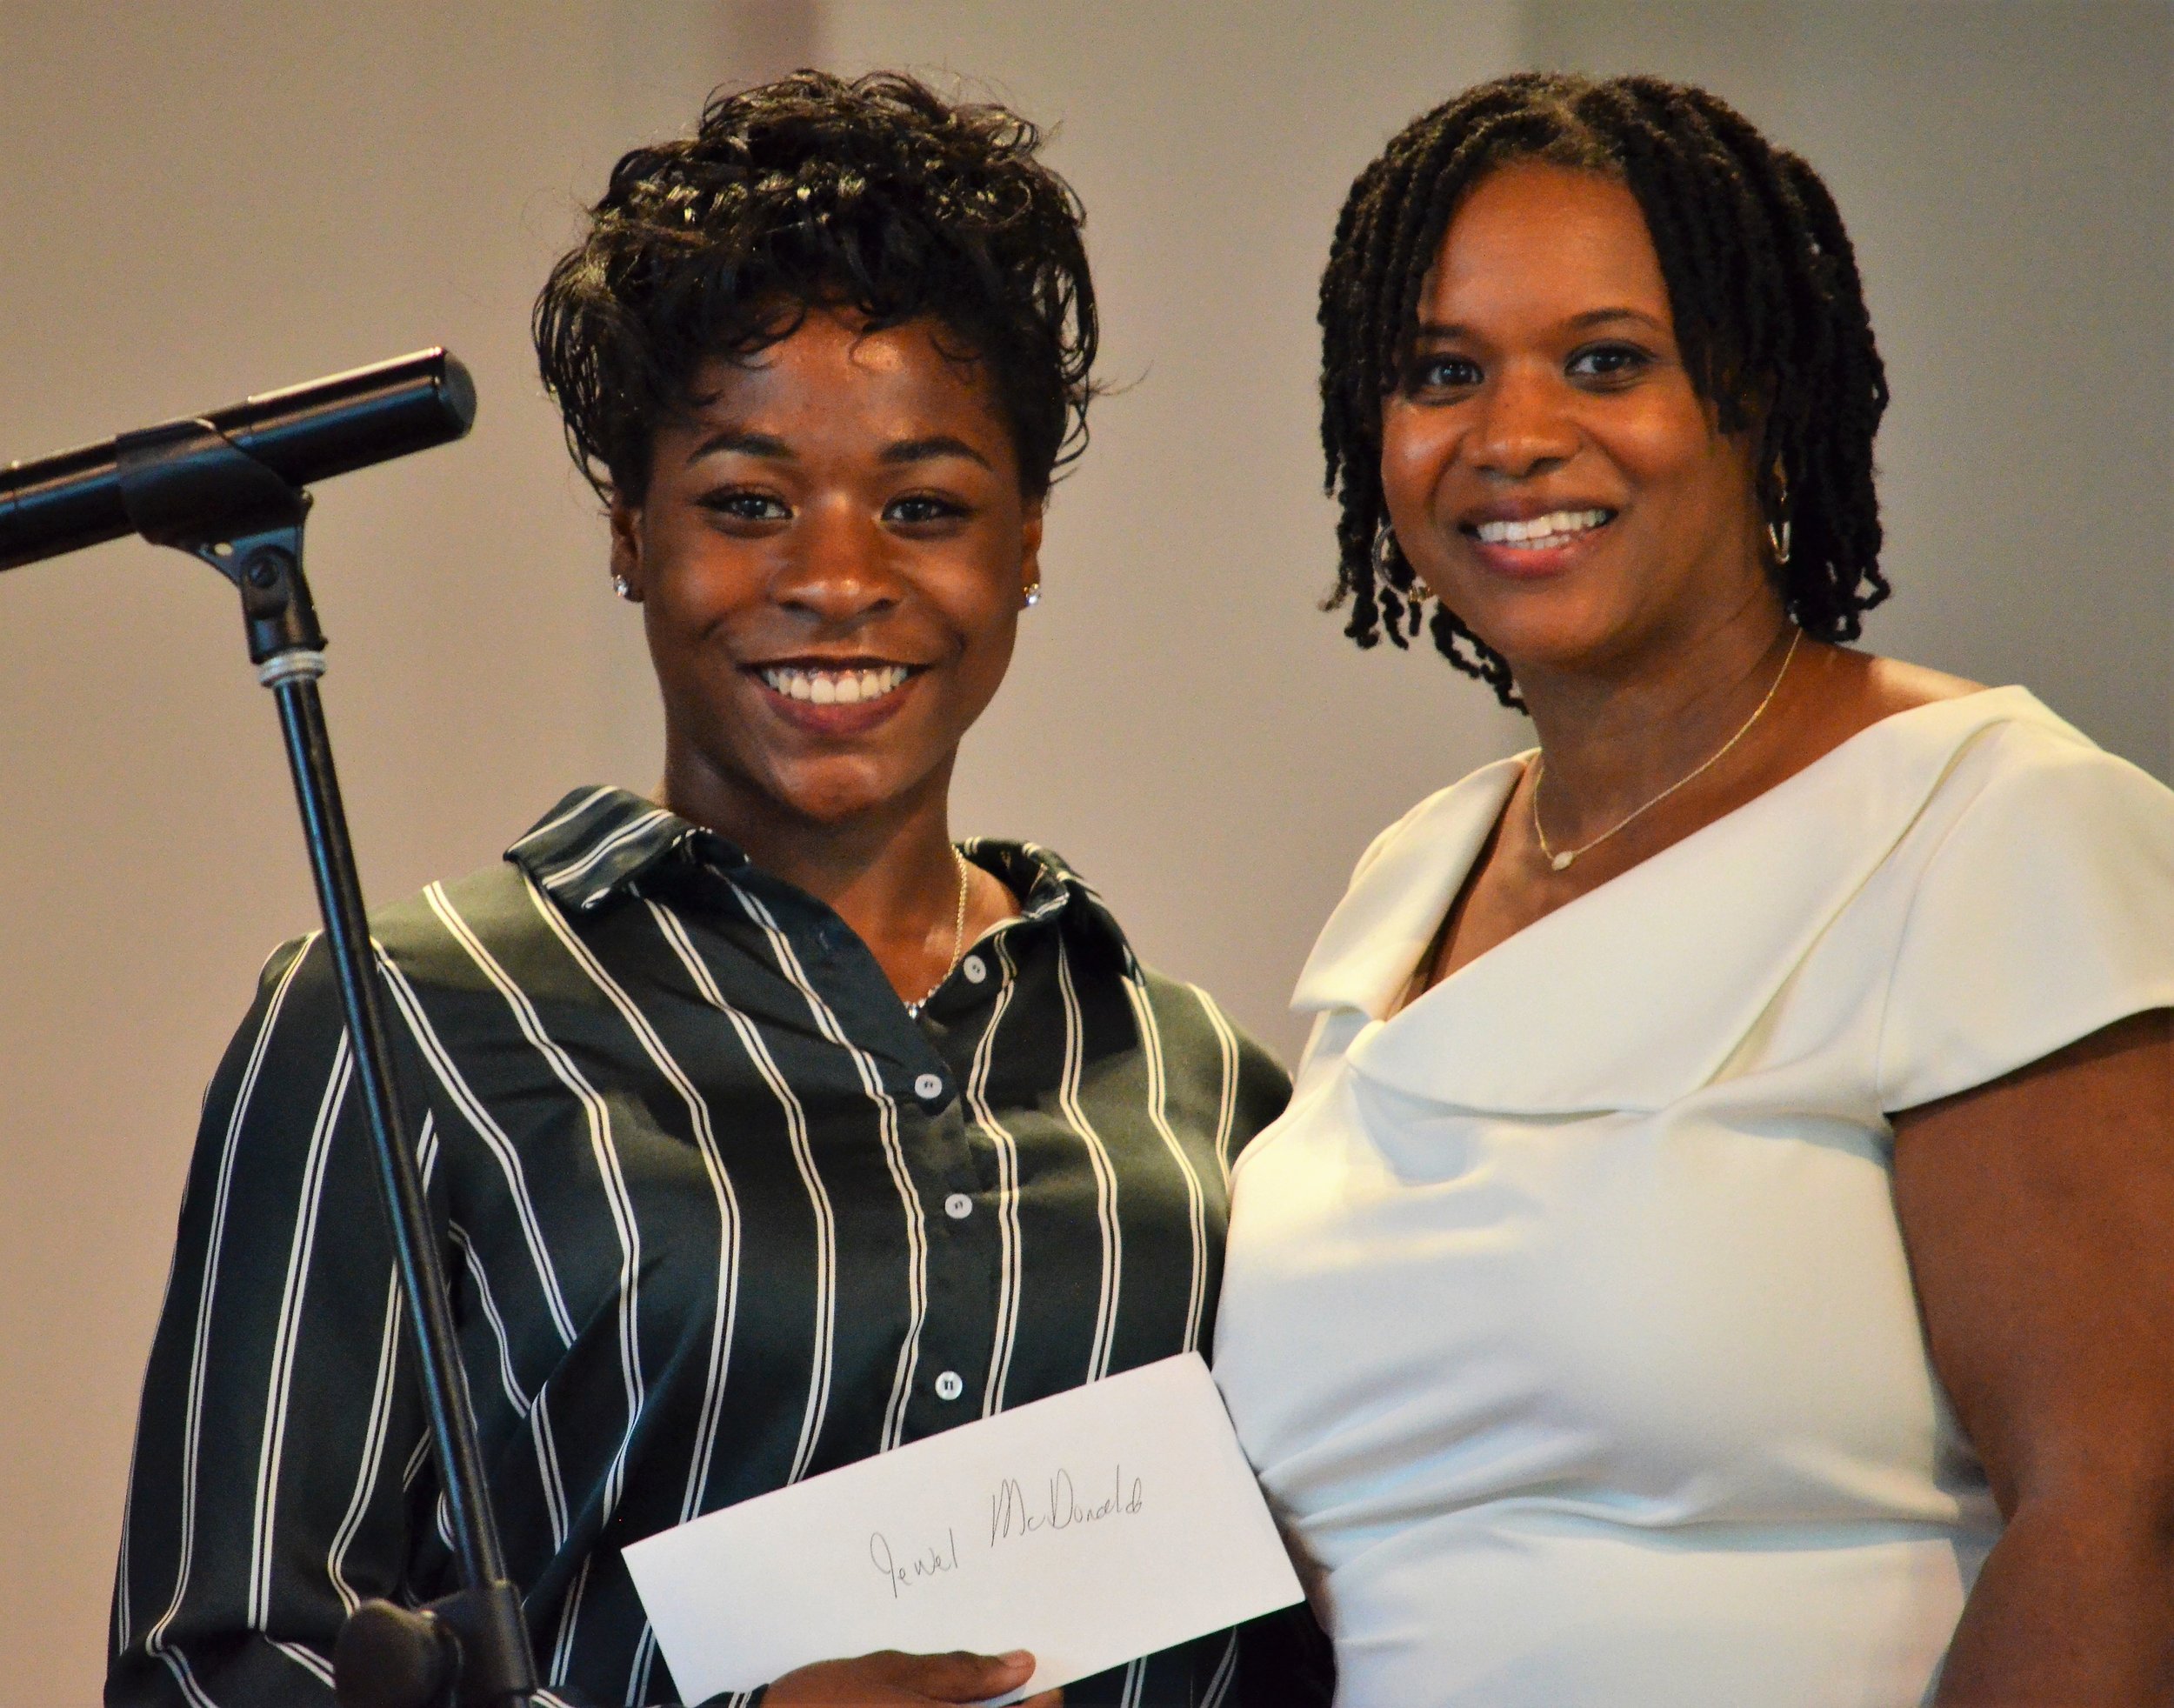  Jewel McDonald accepts the Dr. Jowava Morrow Book Scholarship Award from Yaminah Leggett-Wells, daughter and family representative of Dr. Jowava Morrow. Jewel is attending North Carolina A&amp;T State University in Greensboro, N.C. 